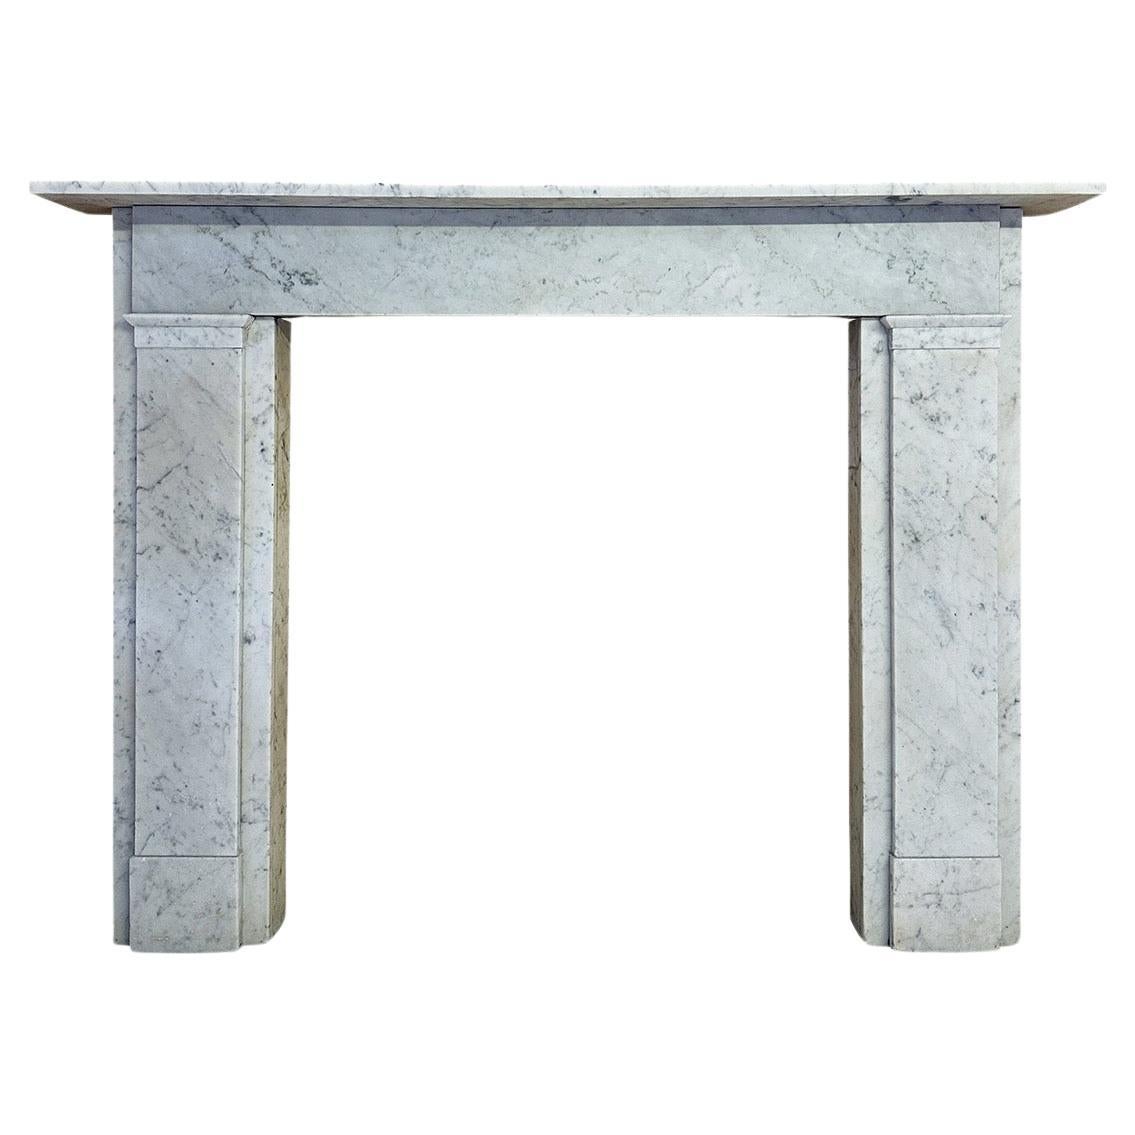 A large Antique English Carrara Marble Fireplace Mantel  For Sale